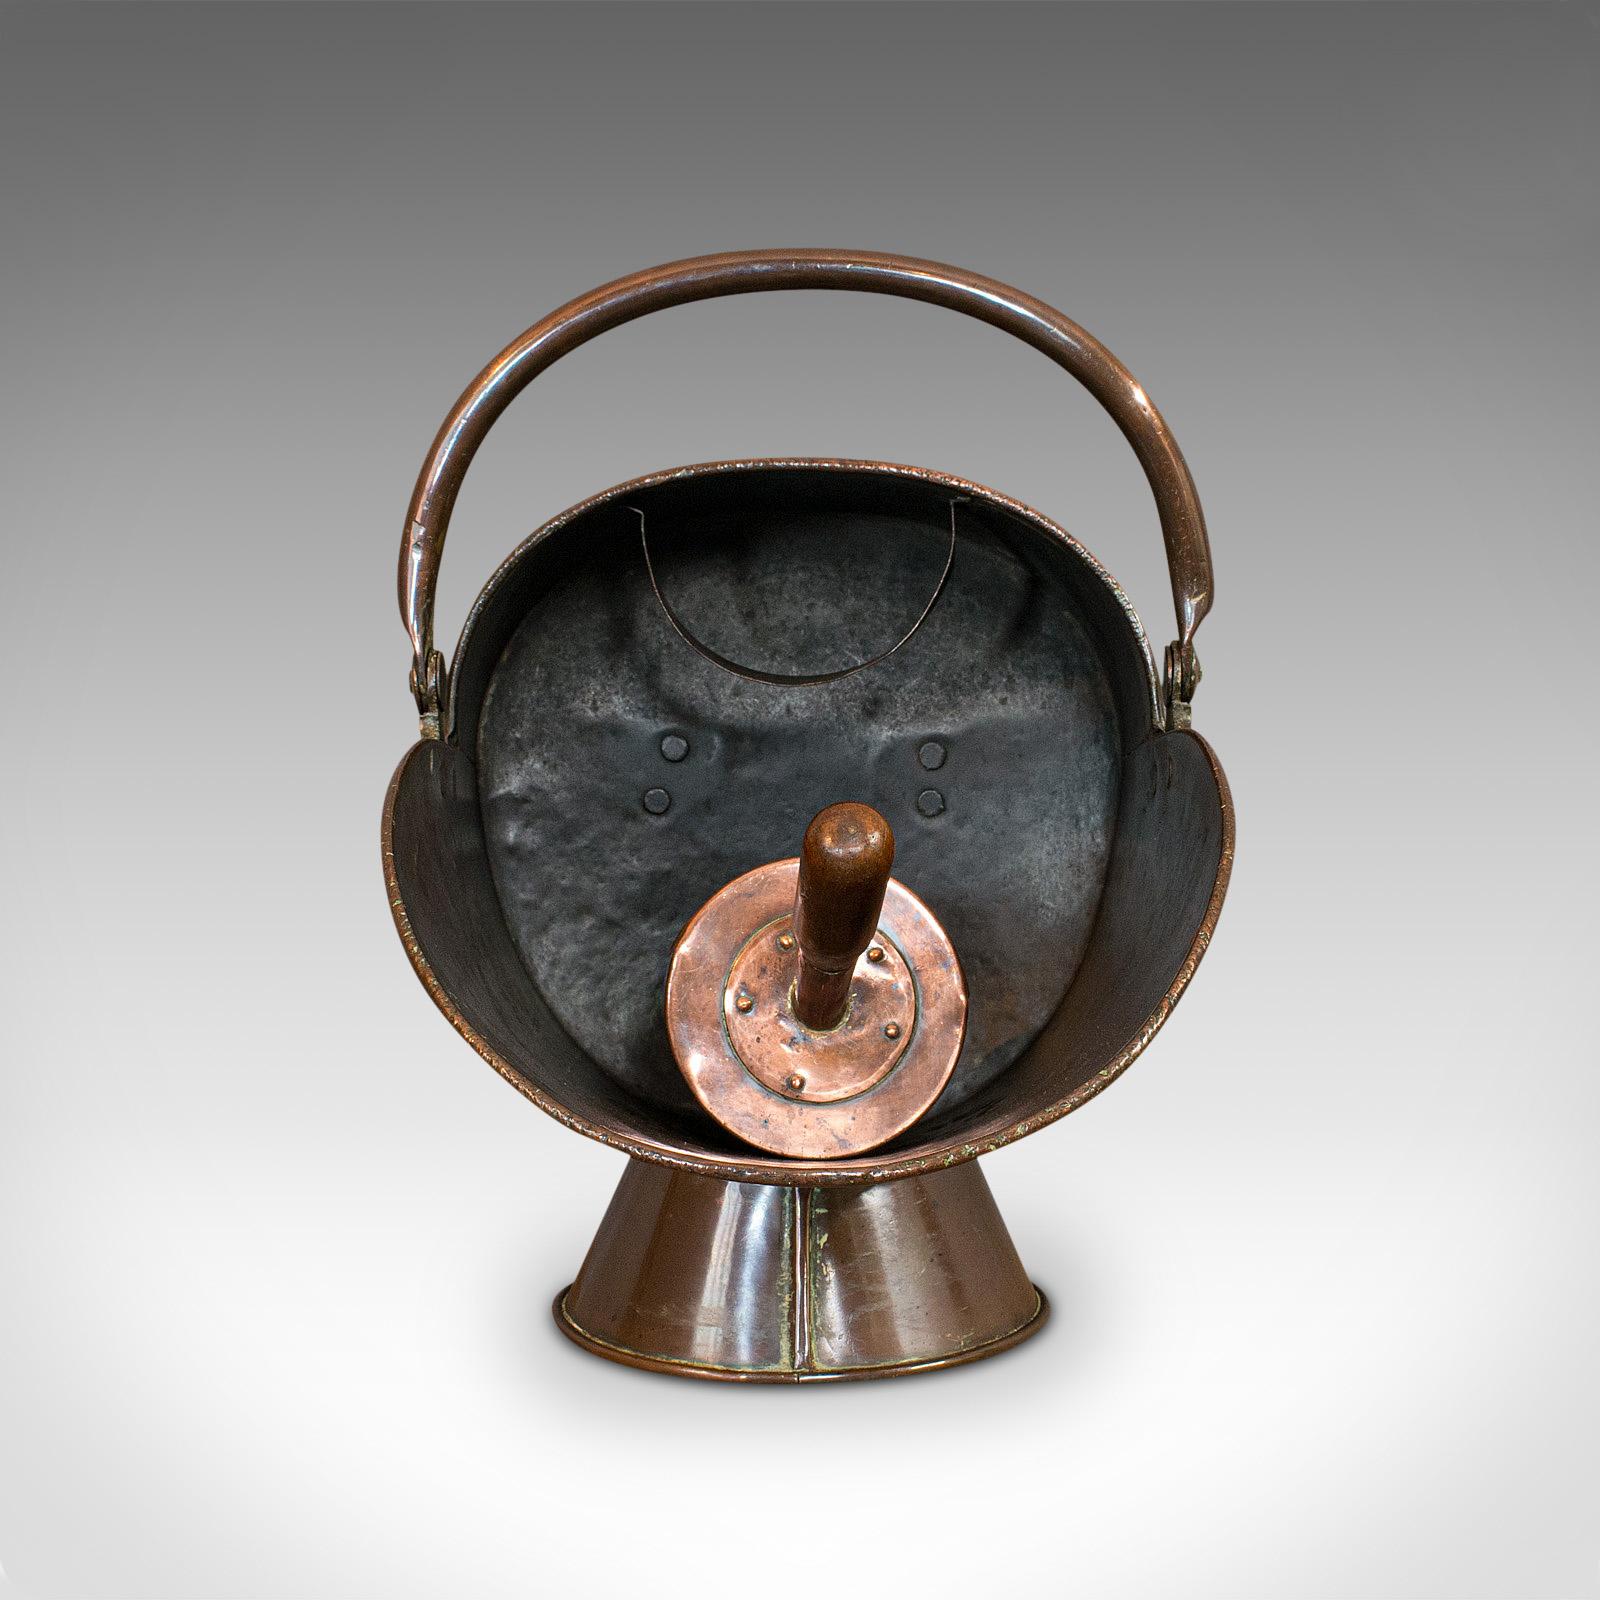 This is an antique helmet coal scuttle. An English, copper fireside bucket, dating to the Victorian period, circa 1870.

Attractive antique scuttle and companion scoop
Displays a desirable aged patina
Rich copper tones and hues, superb